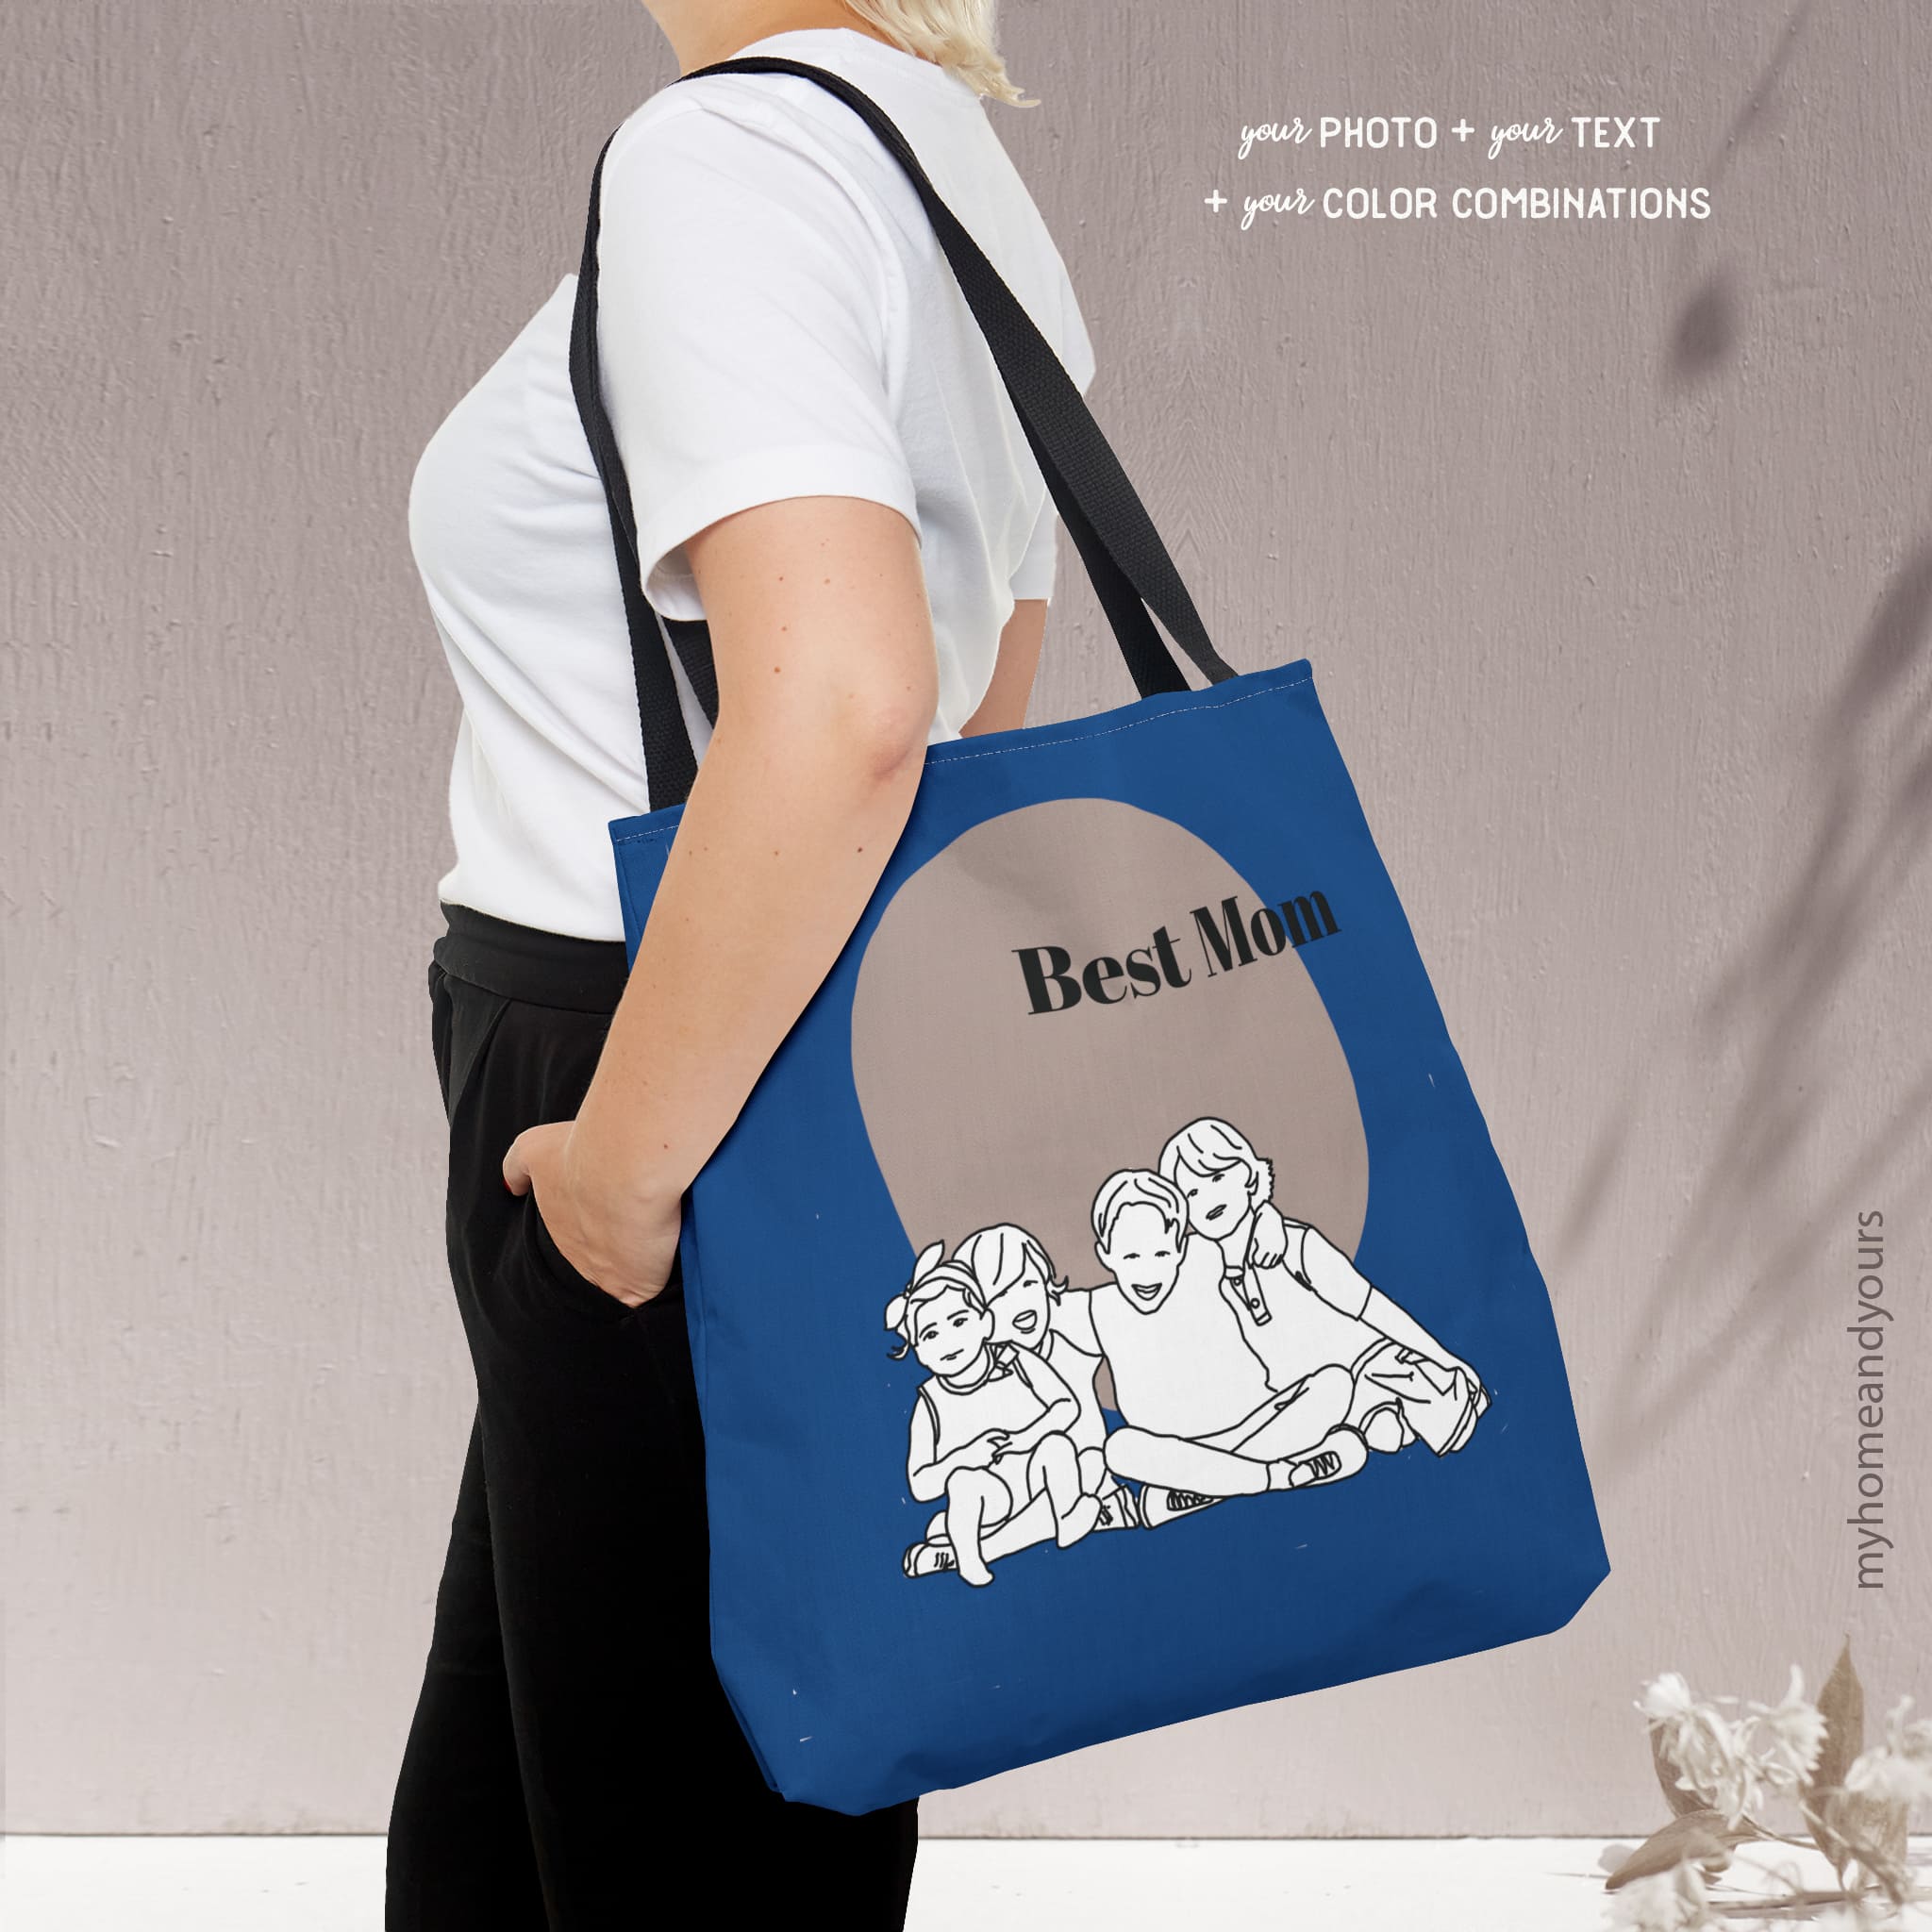 Custom illustrated tote bag for the best mom with line art portrait illustration of your kids on colorful colorblocking or terrazzo patterned background